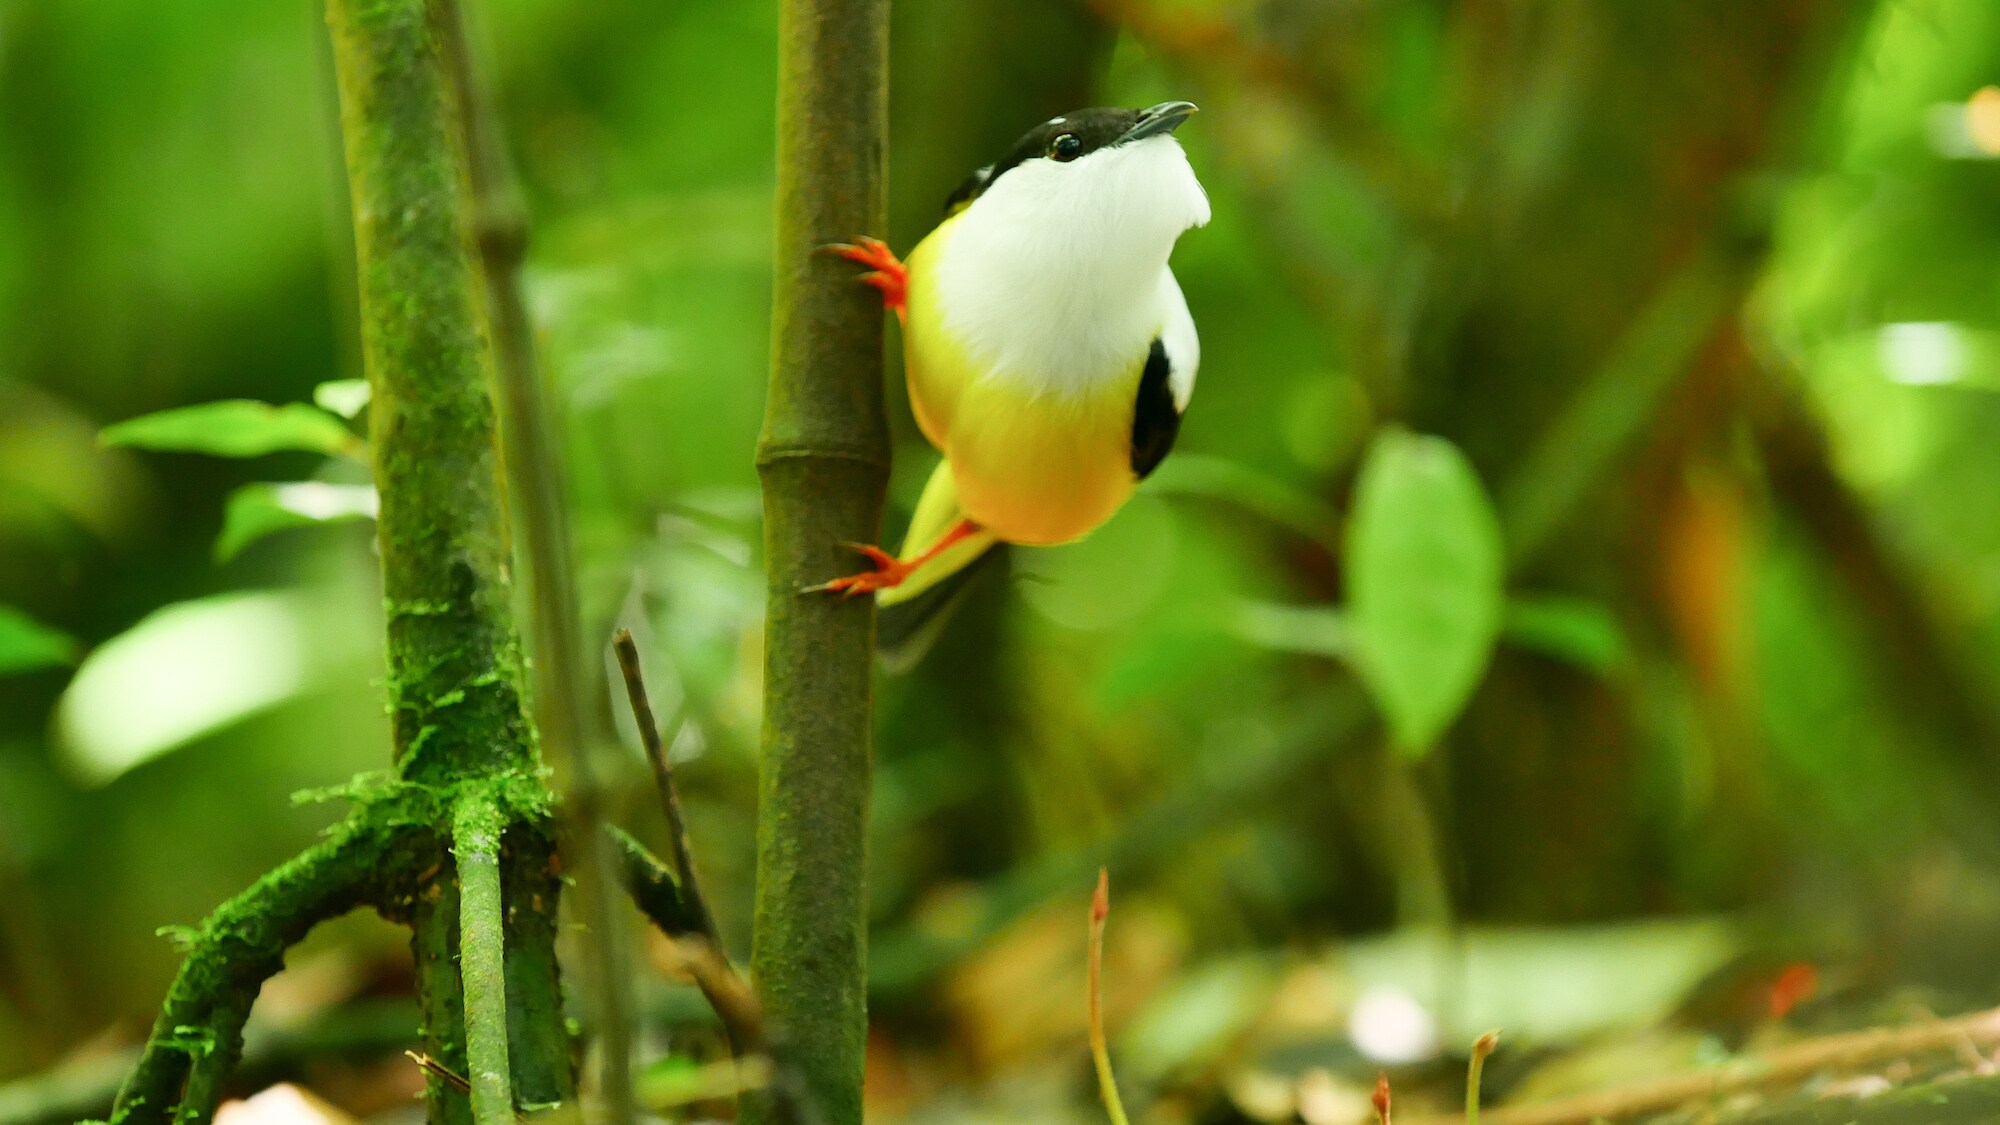 Manakin bird perched on a tree stem.  (National Geographic for Disney+/James Manisty)